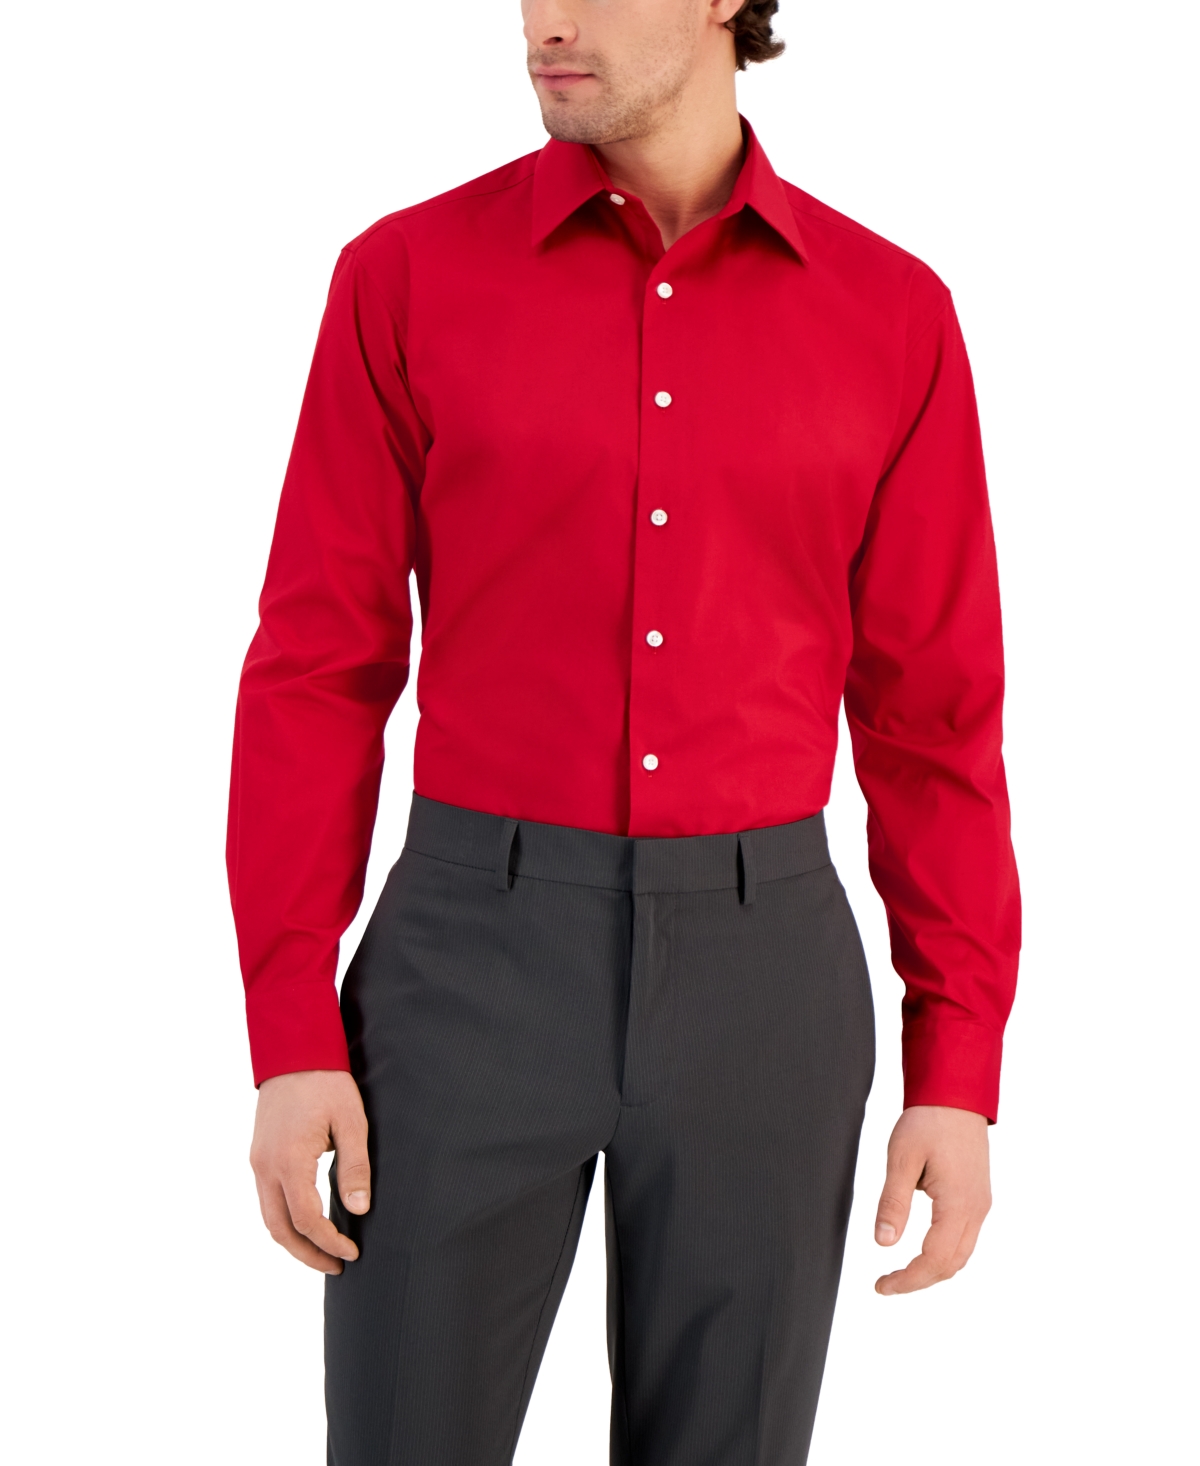 Men's Regular Fit Solid Dress Shirt, Created for Macy's - Jester Red